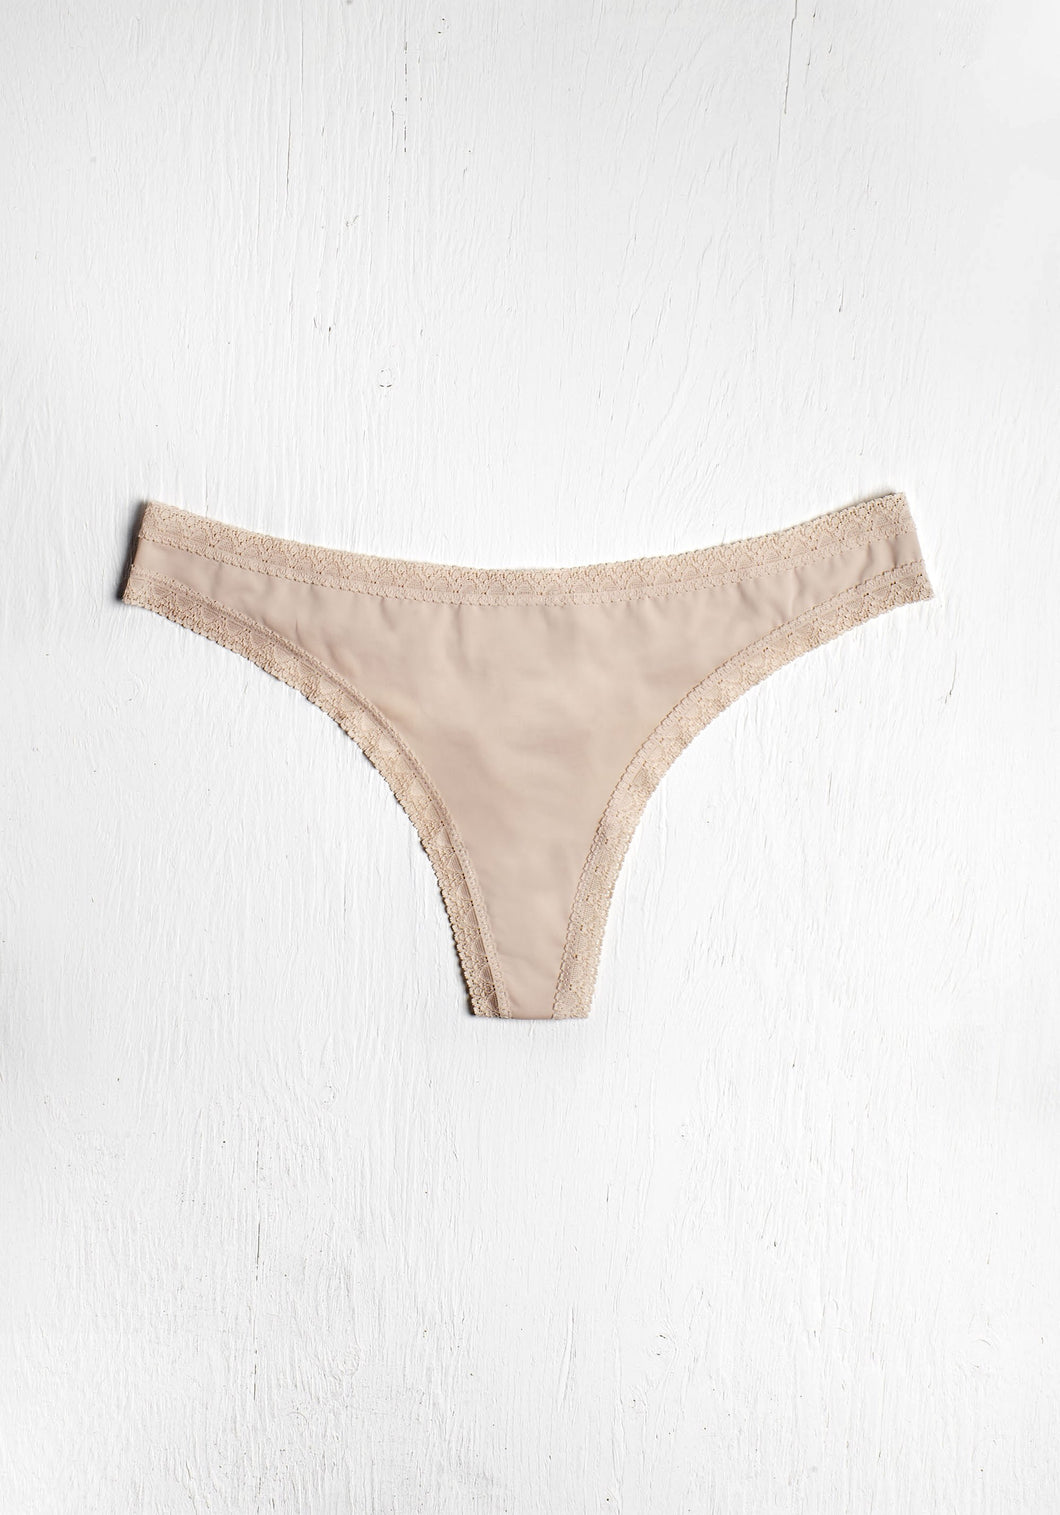 The Micro Lace Trim Thong - Nude